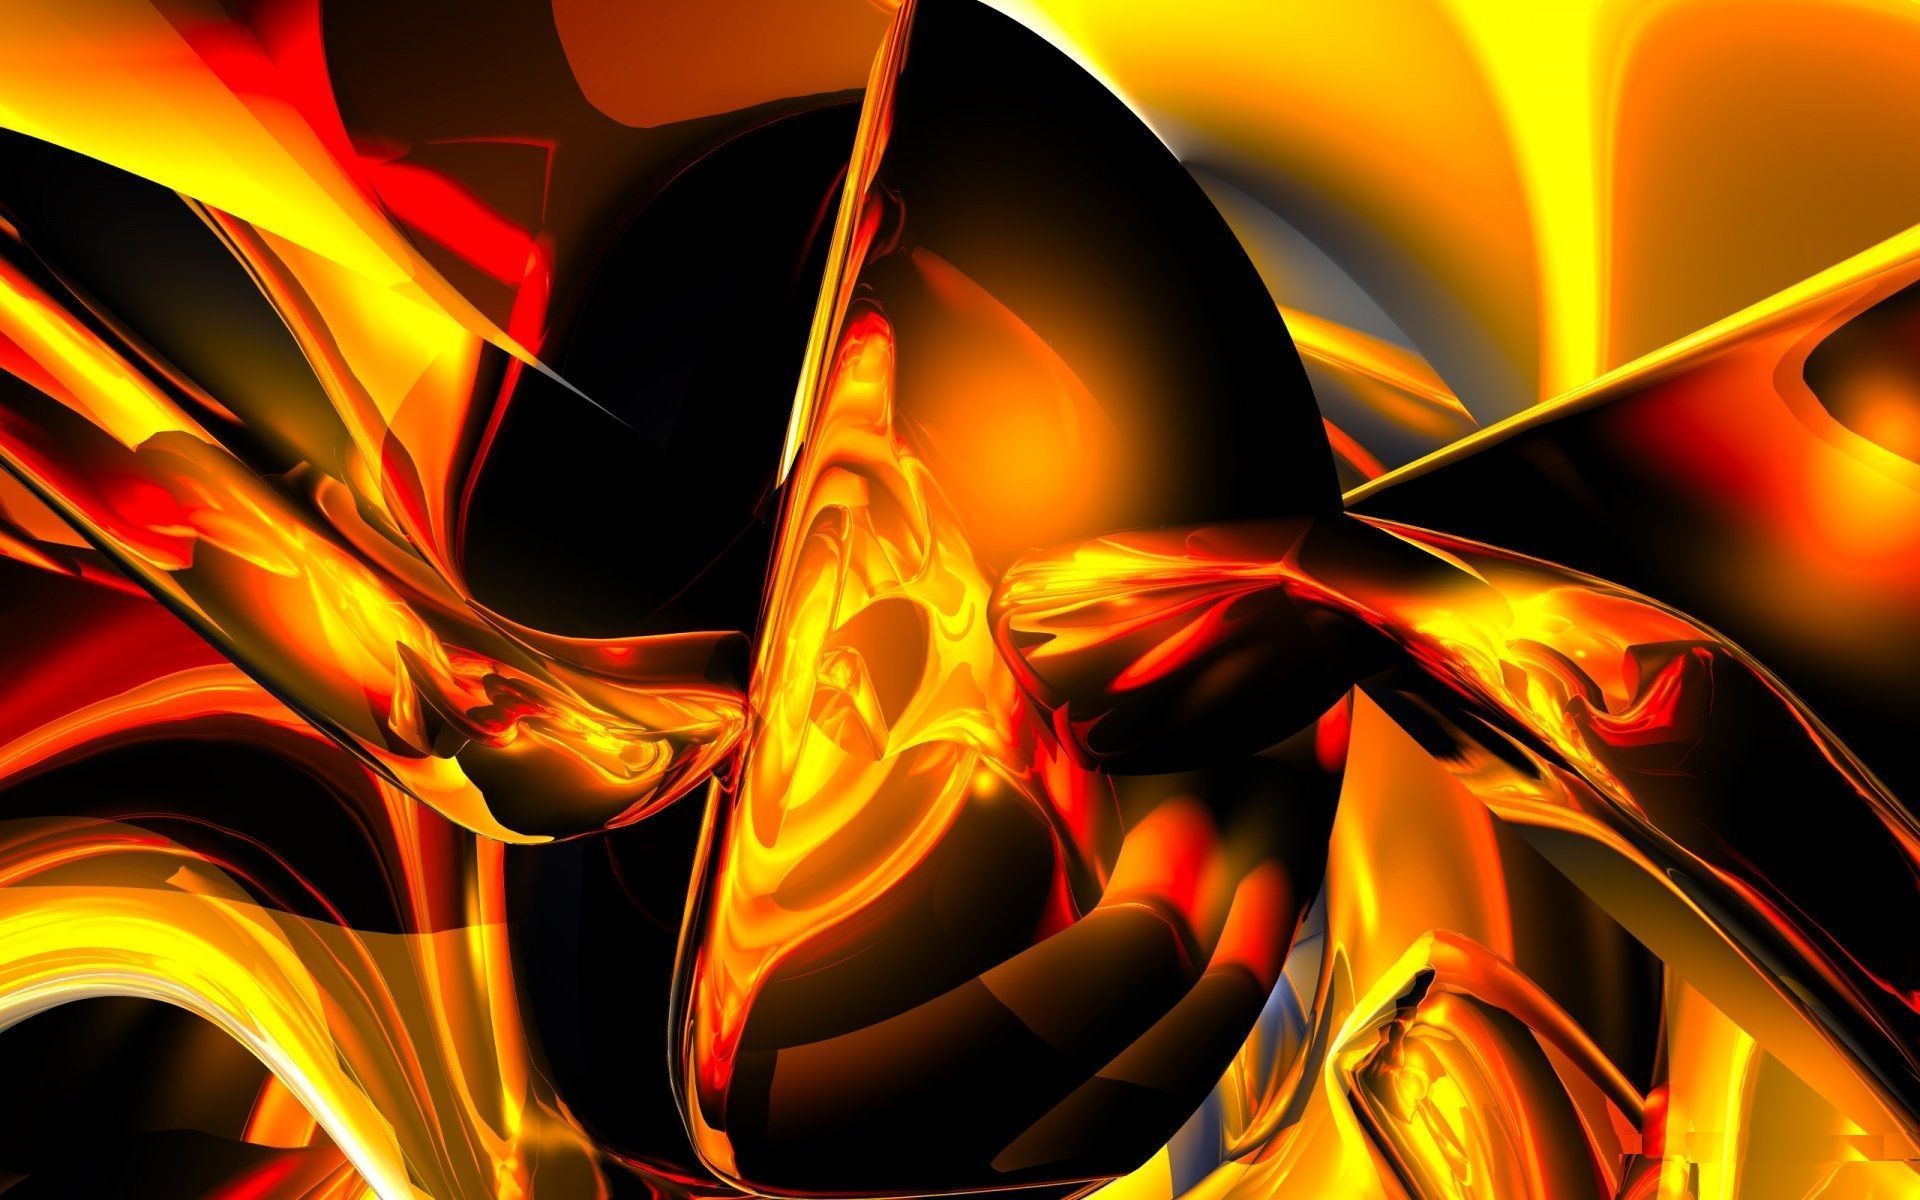 colourful-fire-flame-widescreen-high-resolution-wallpaper-for-desktop-background-download-free.jpg